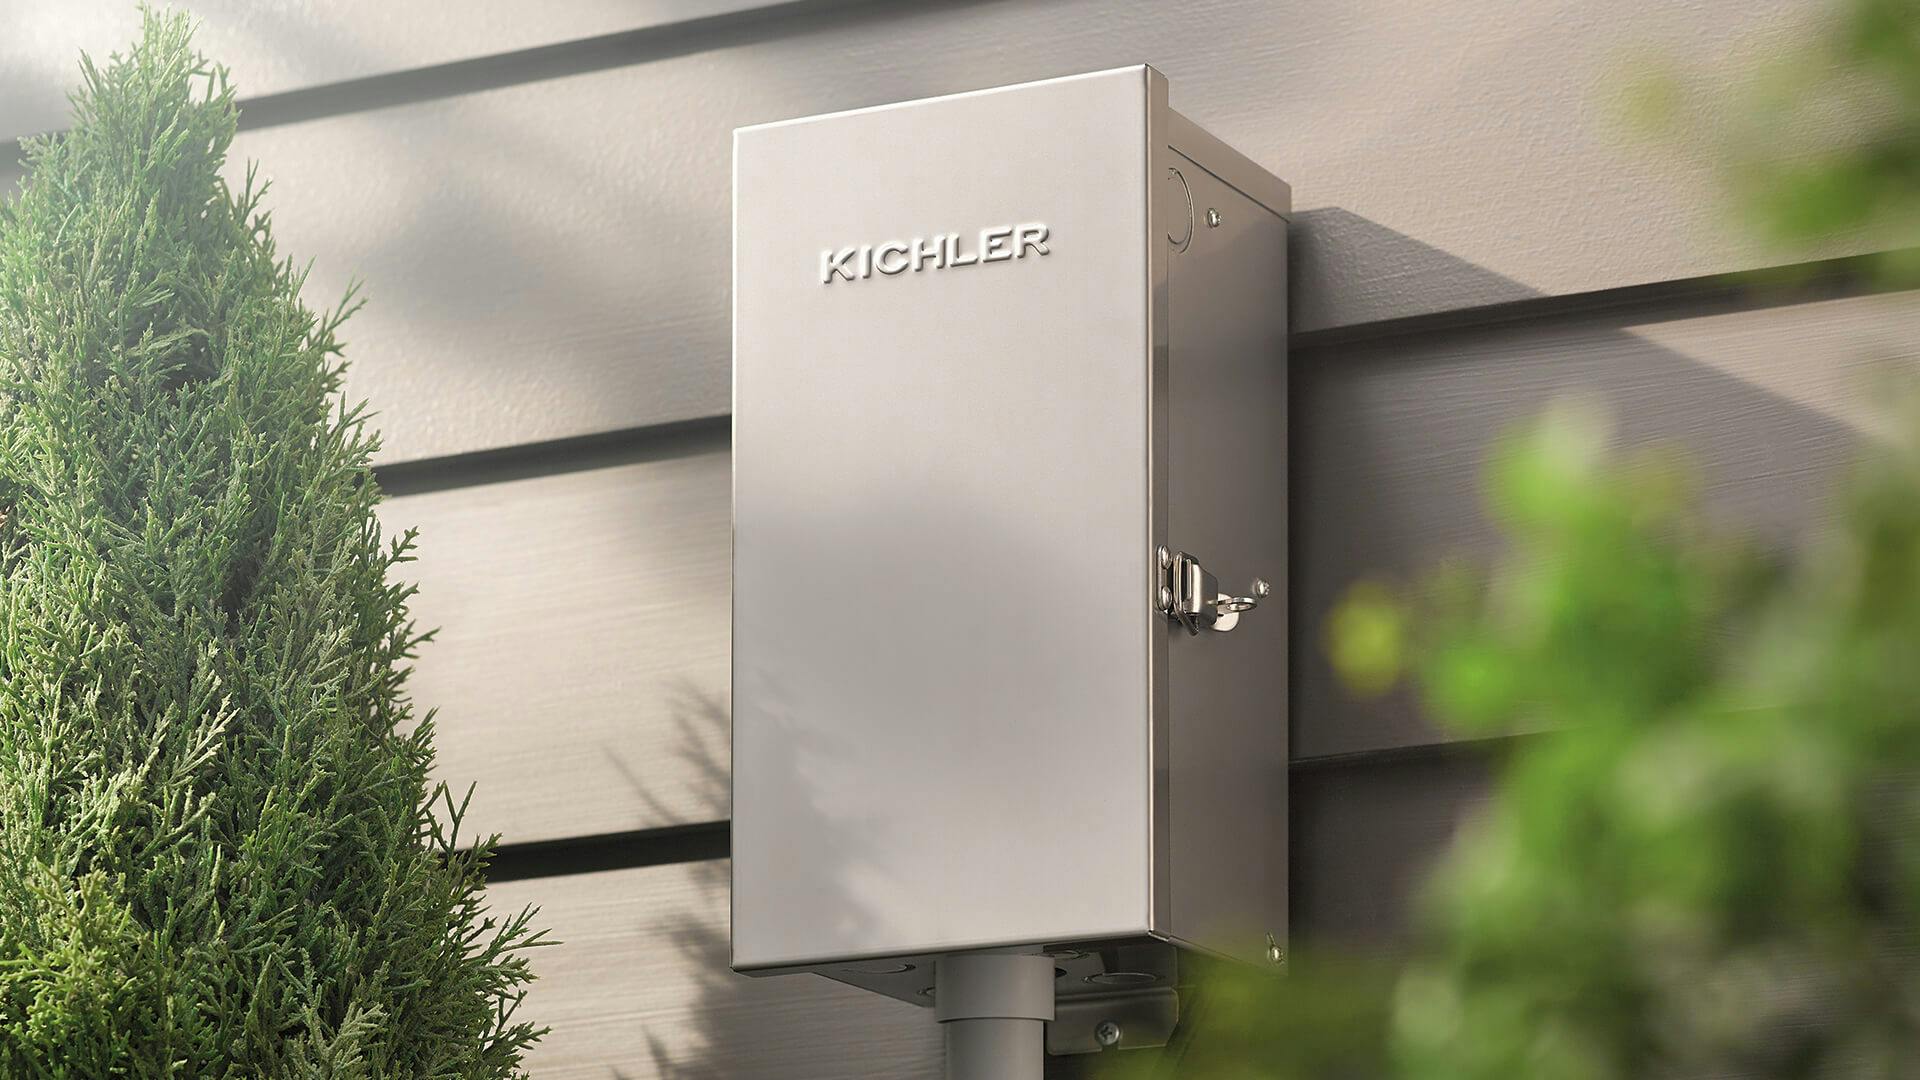 Close up of a grey Kichler transformer box on an exterior wall.